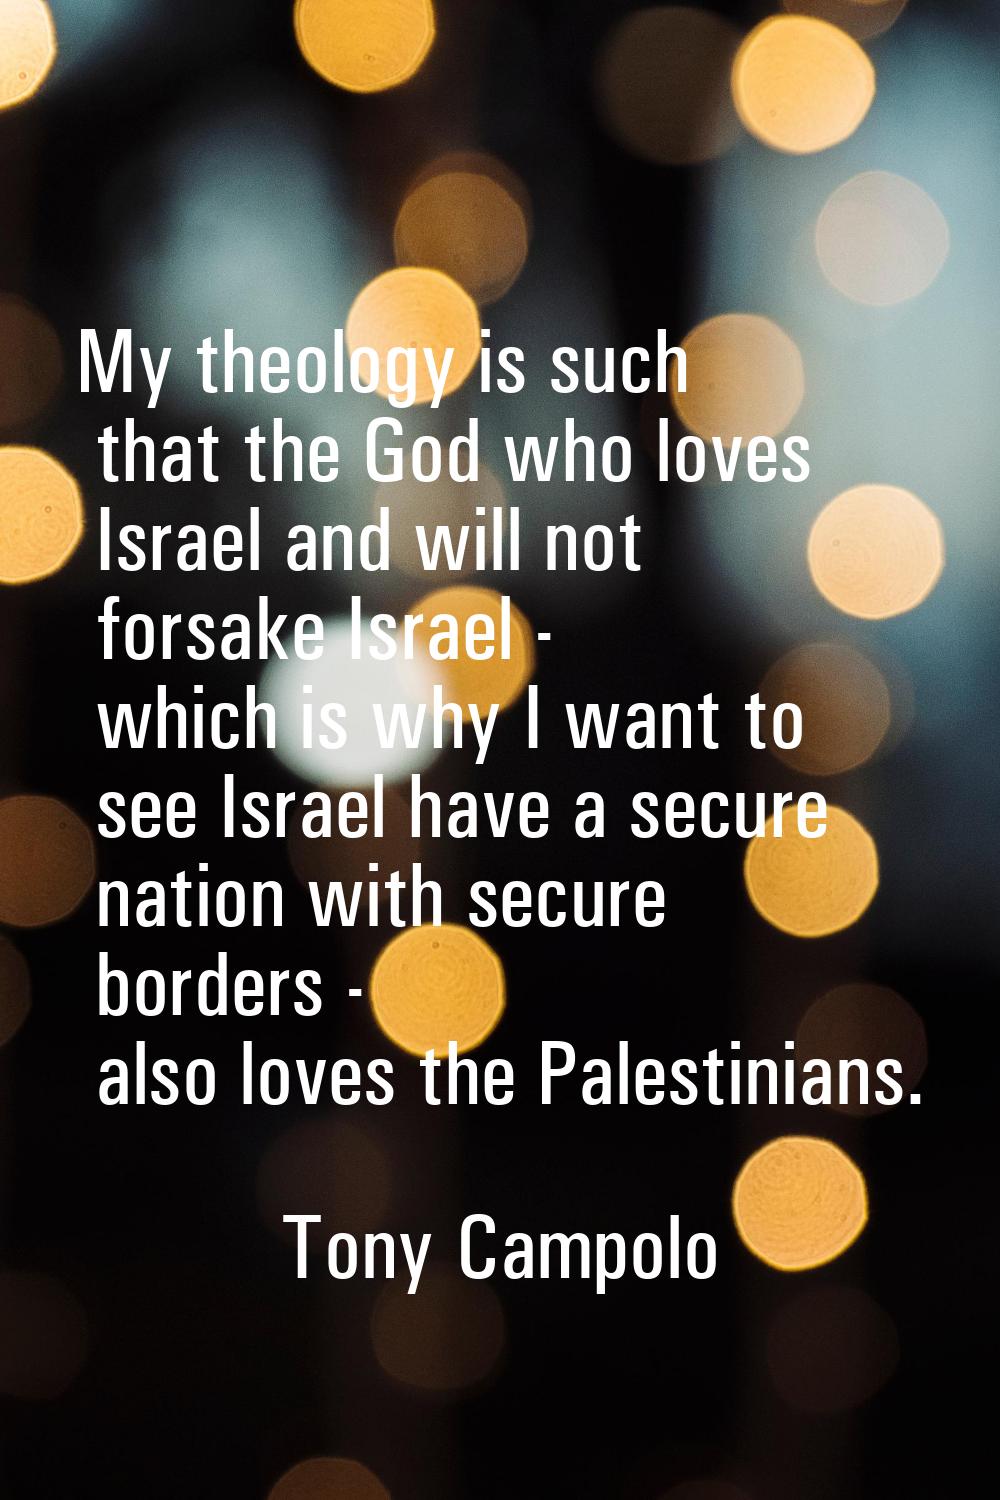 My theology is such that the God who loves Israel and will not forsake Israel - which is why I want